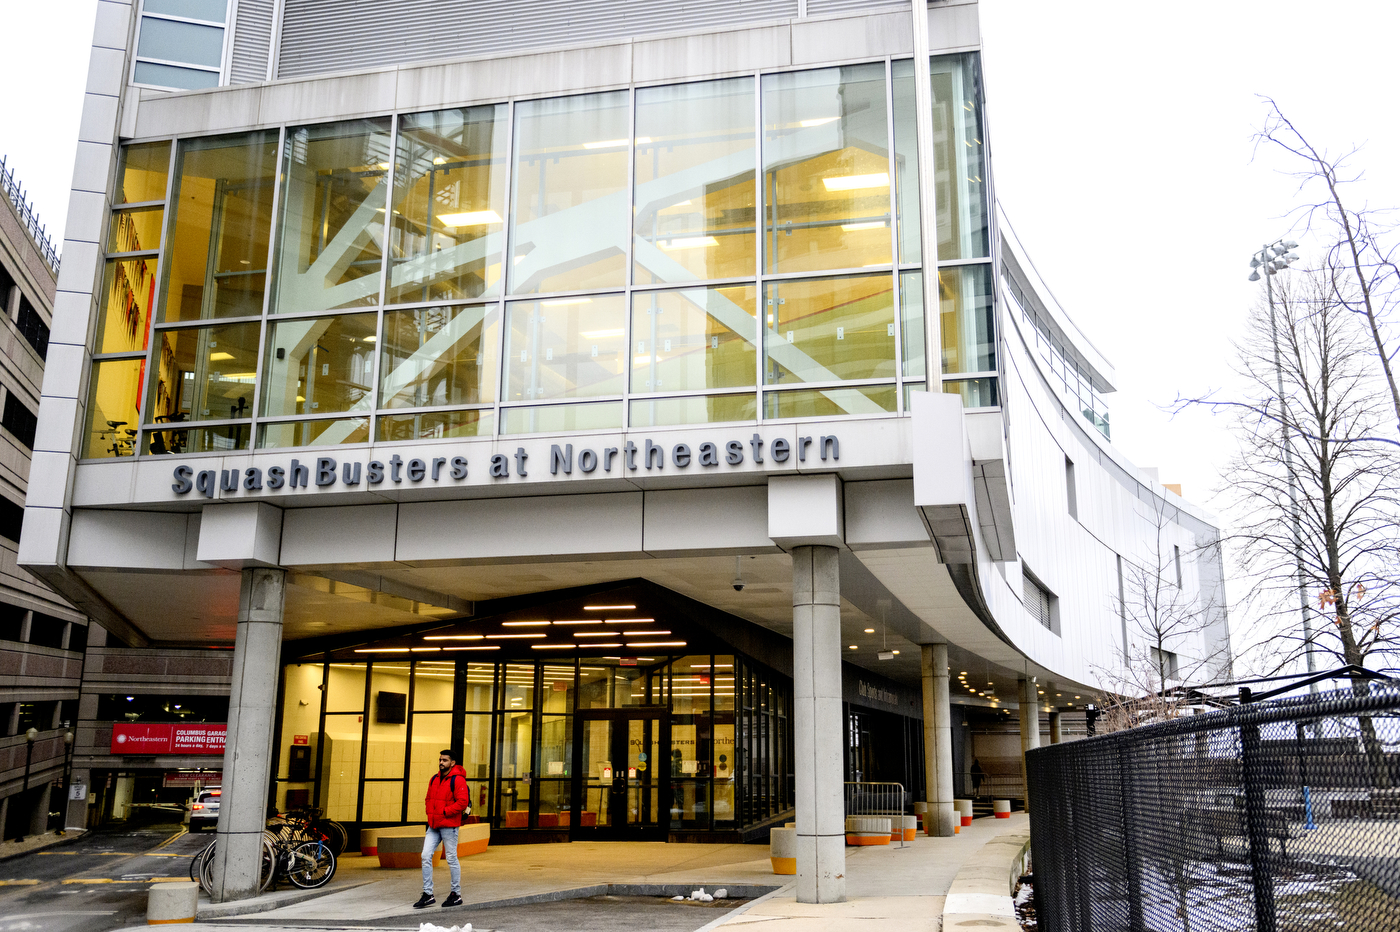 exterior of SquashBusters at Northeastern